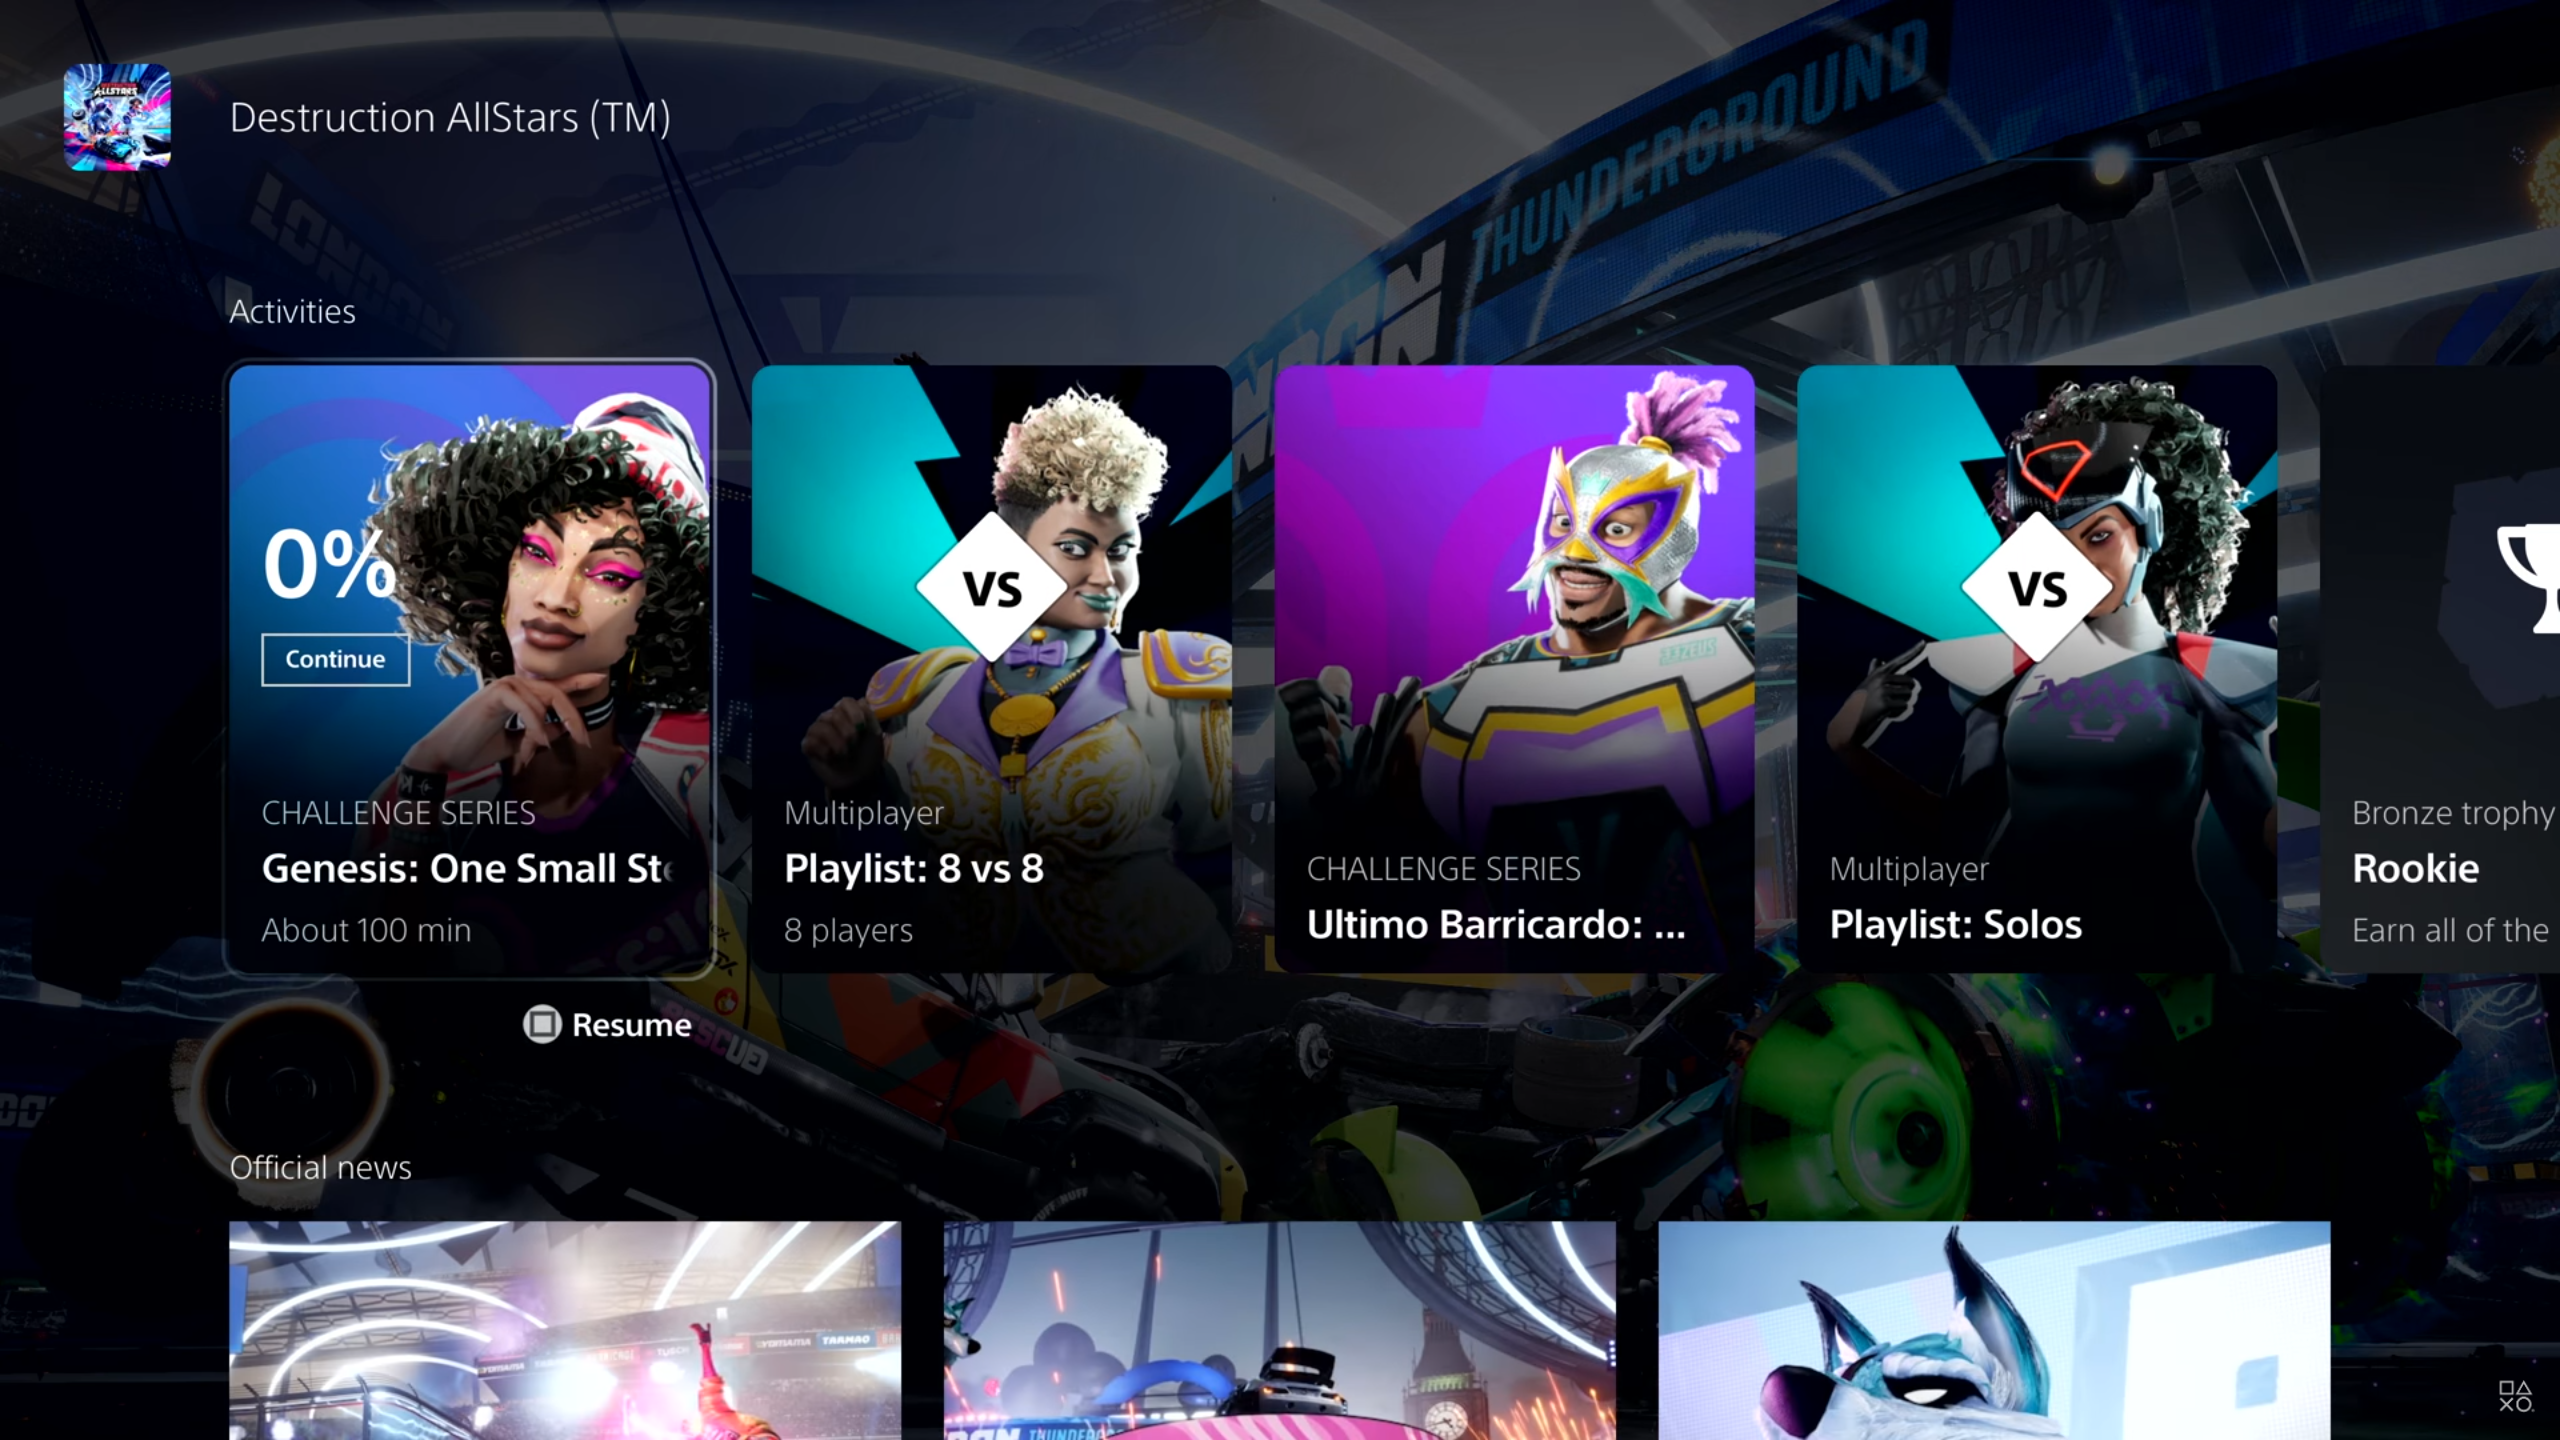 PS5 home screen